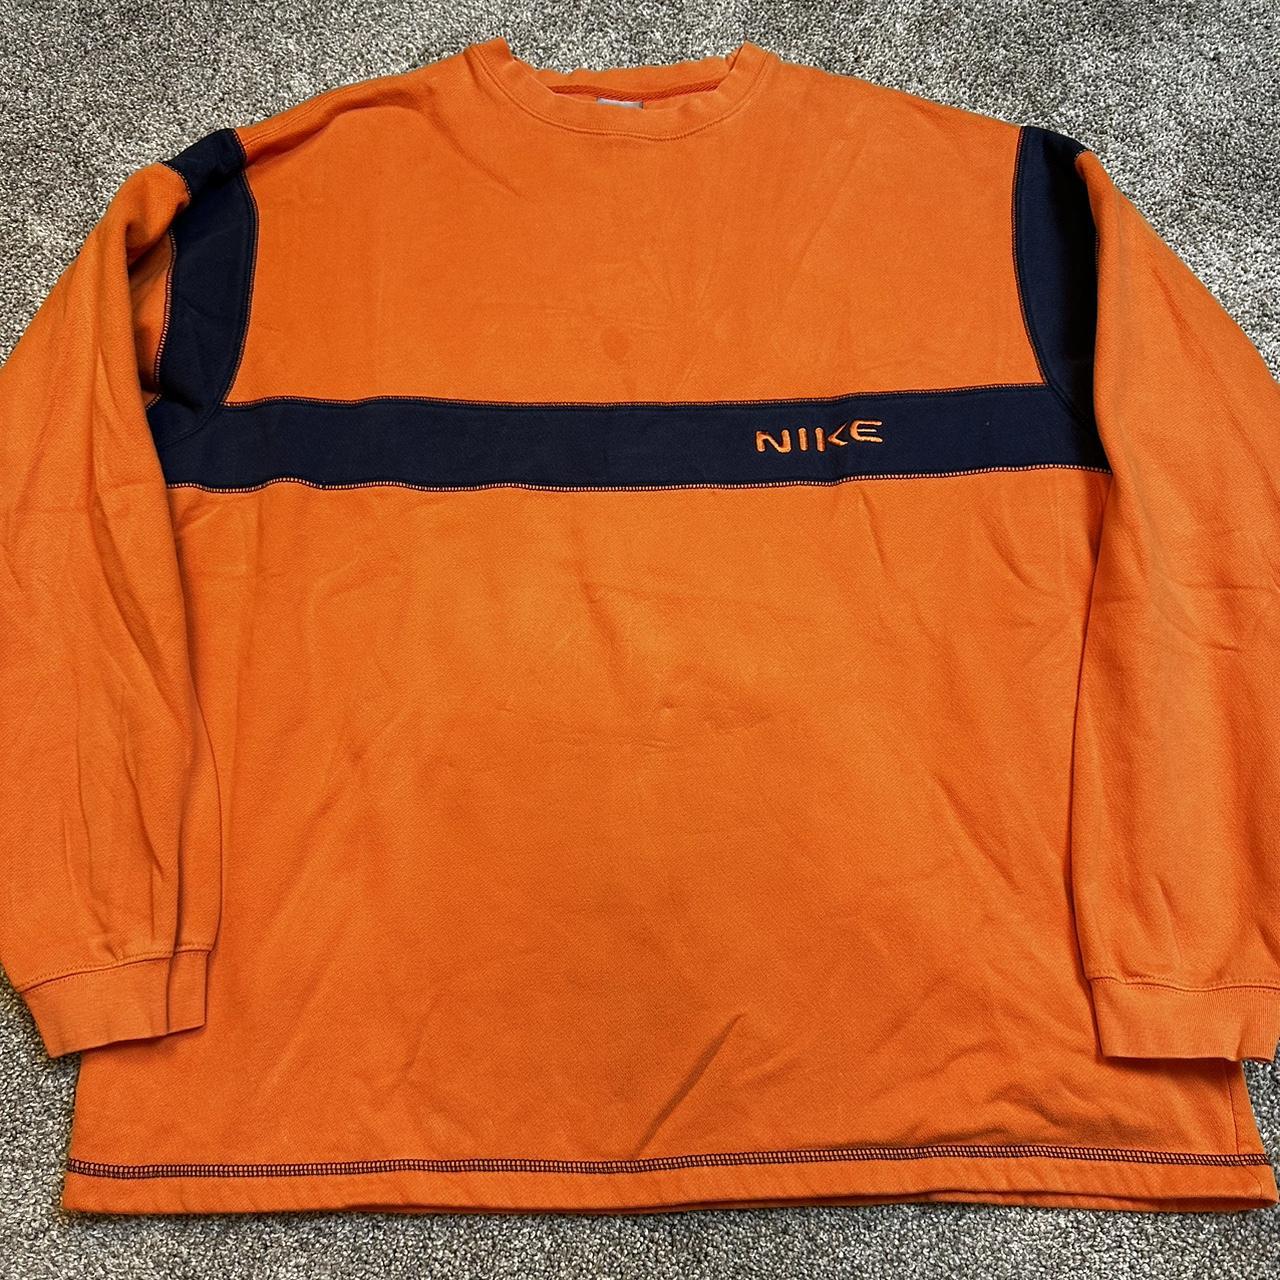 item listed by cashflowthrift